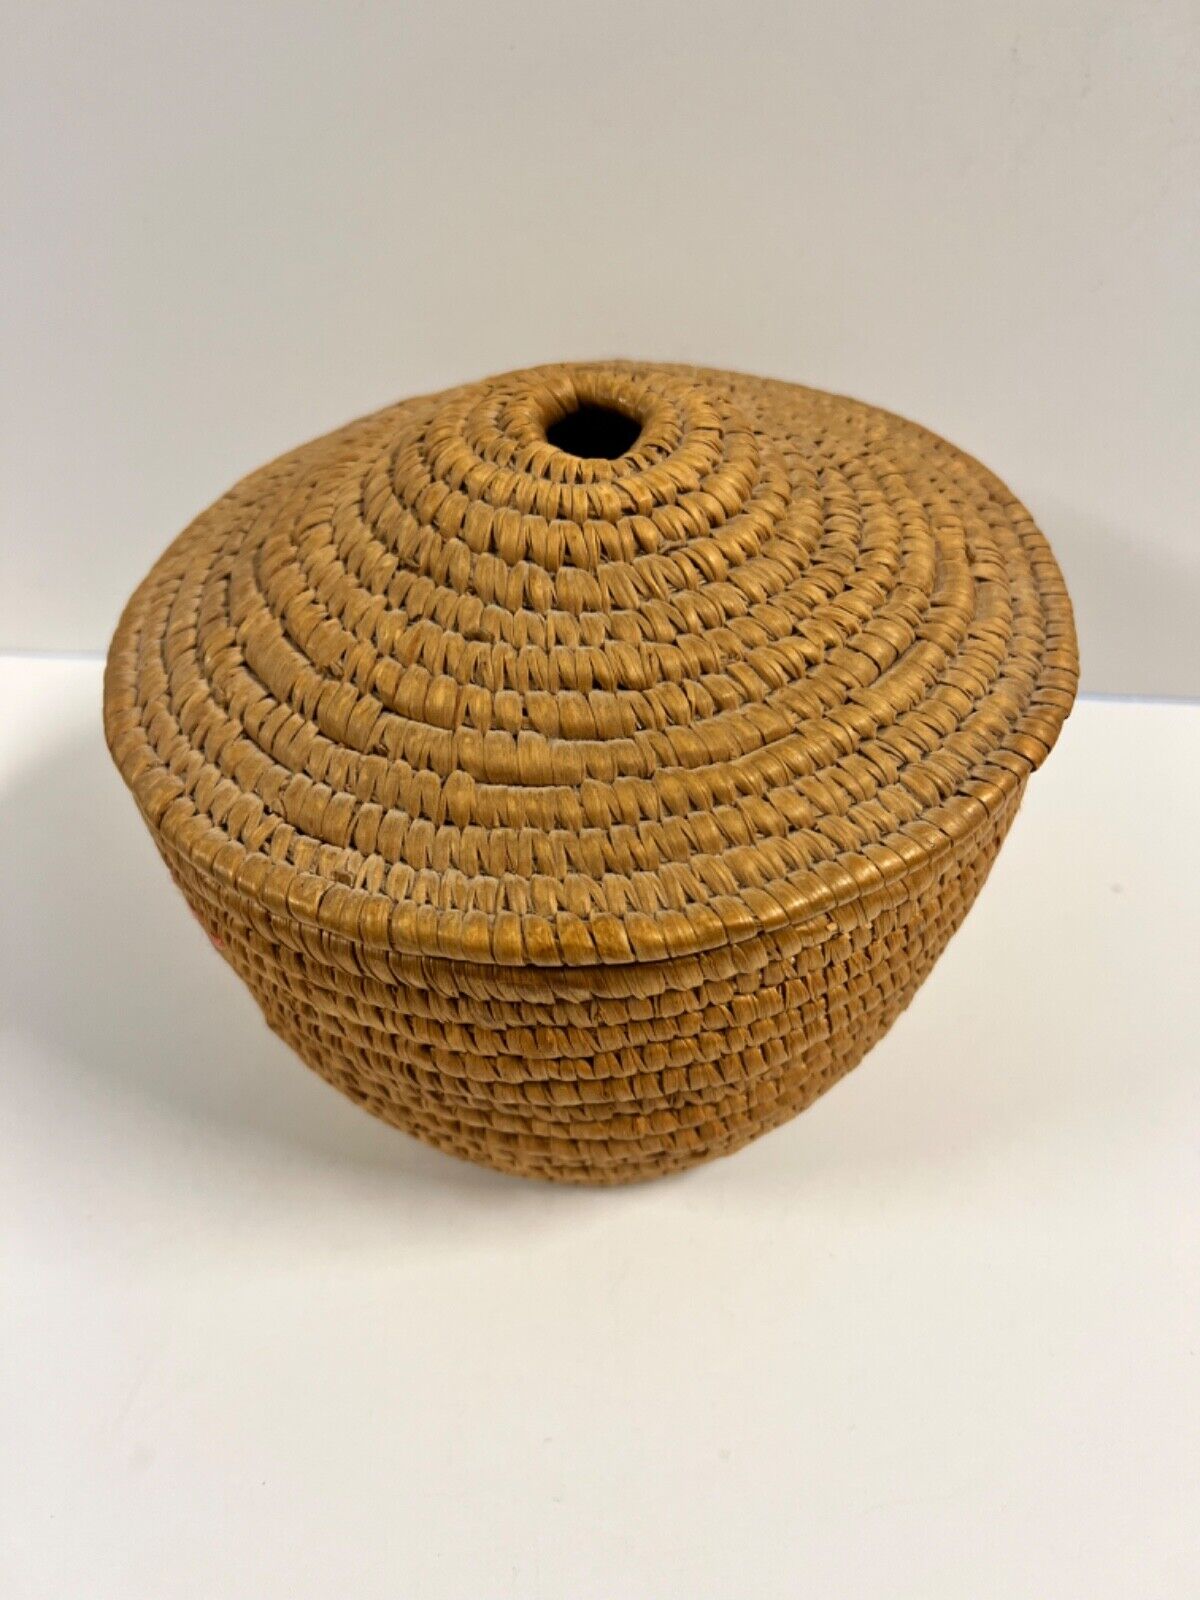 Native American Indian Hand Woven Basket Plus Lid, 1890’s - 1920’s: Lot 8